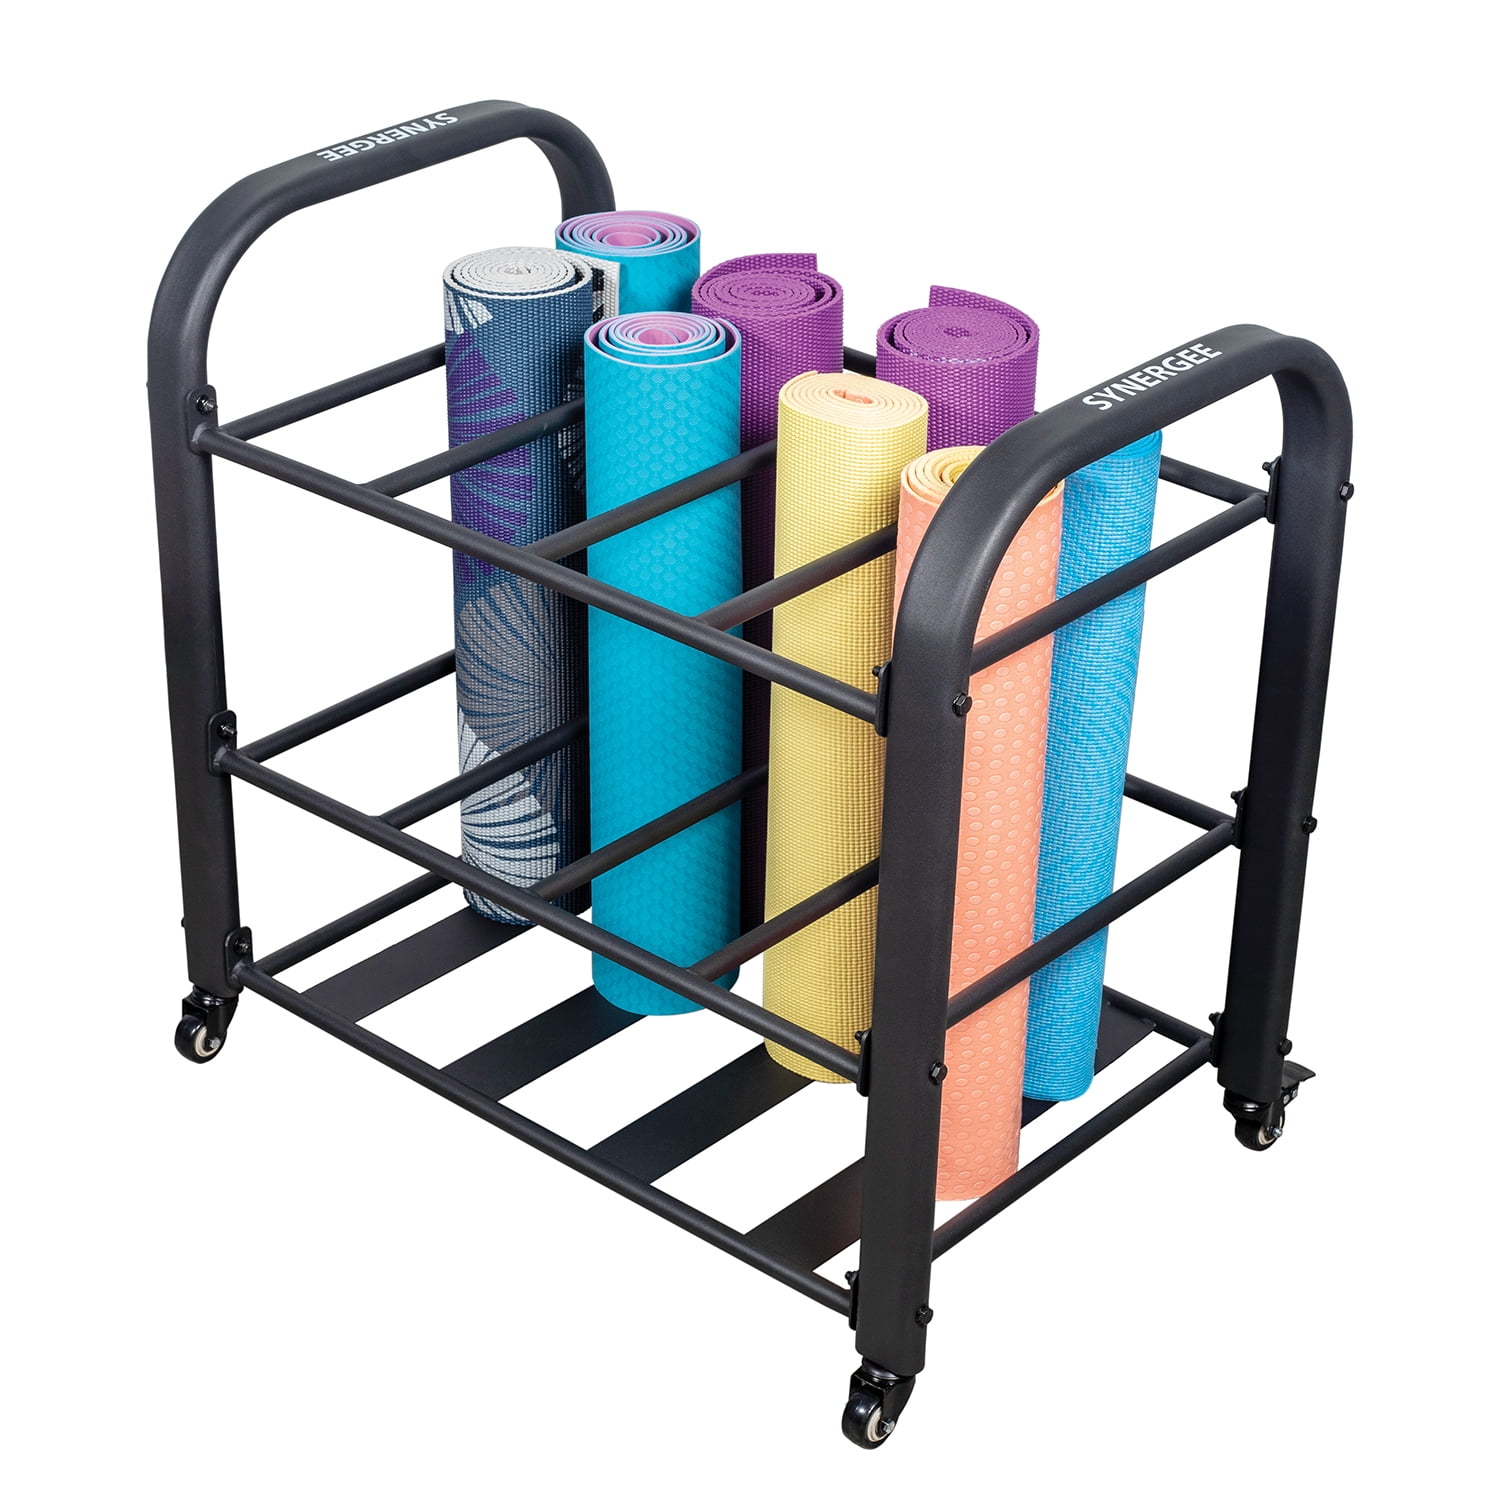 Yoga Mat Foam Roller Storage Rack Cart, Mobility Metal Organizers for  Storing Thick/Thin Gym Mats Exercise Mat, 4 Grid Frame Trolley with Wheels